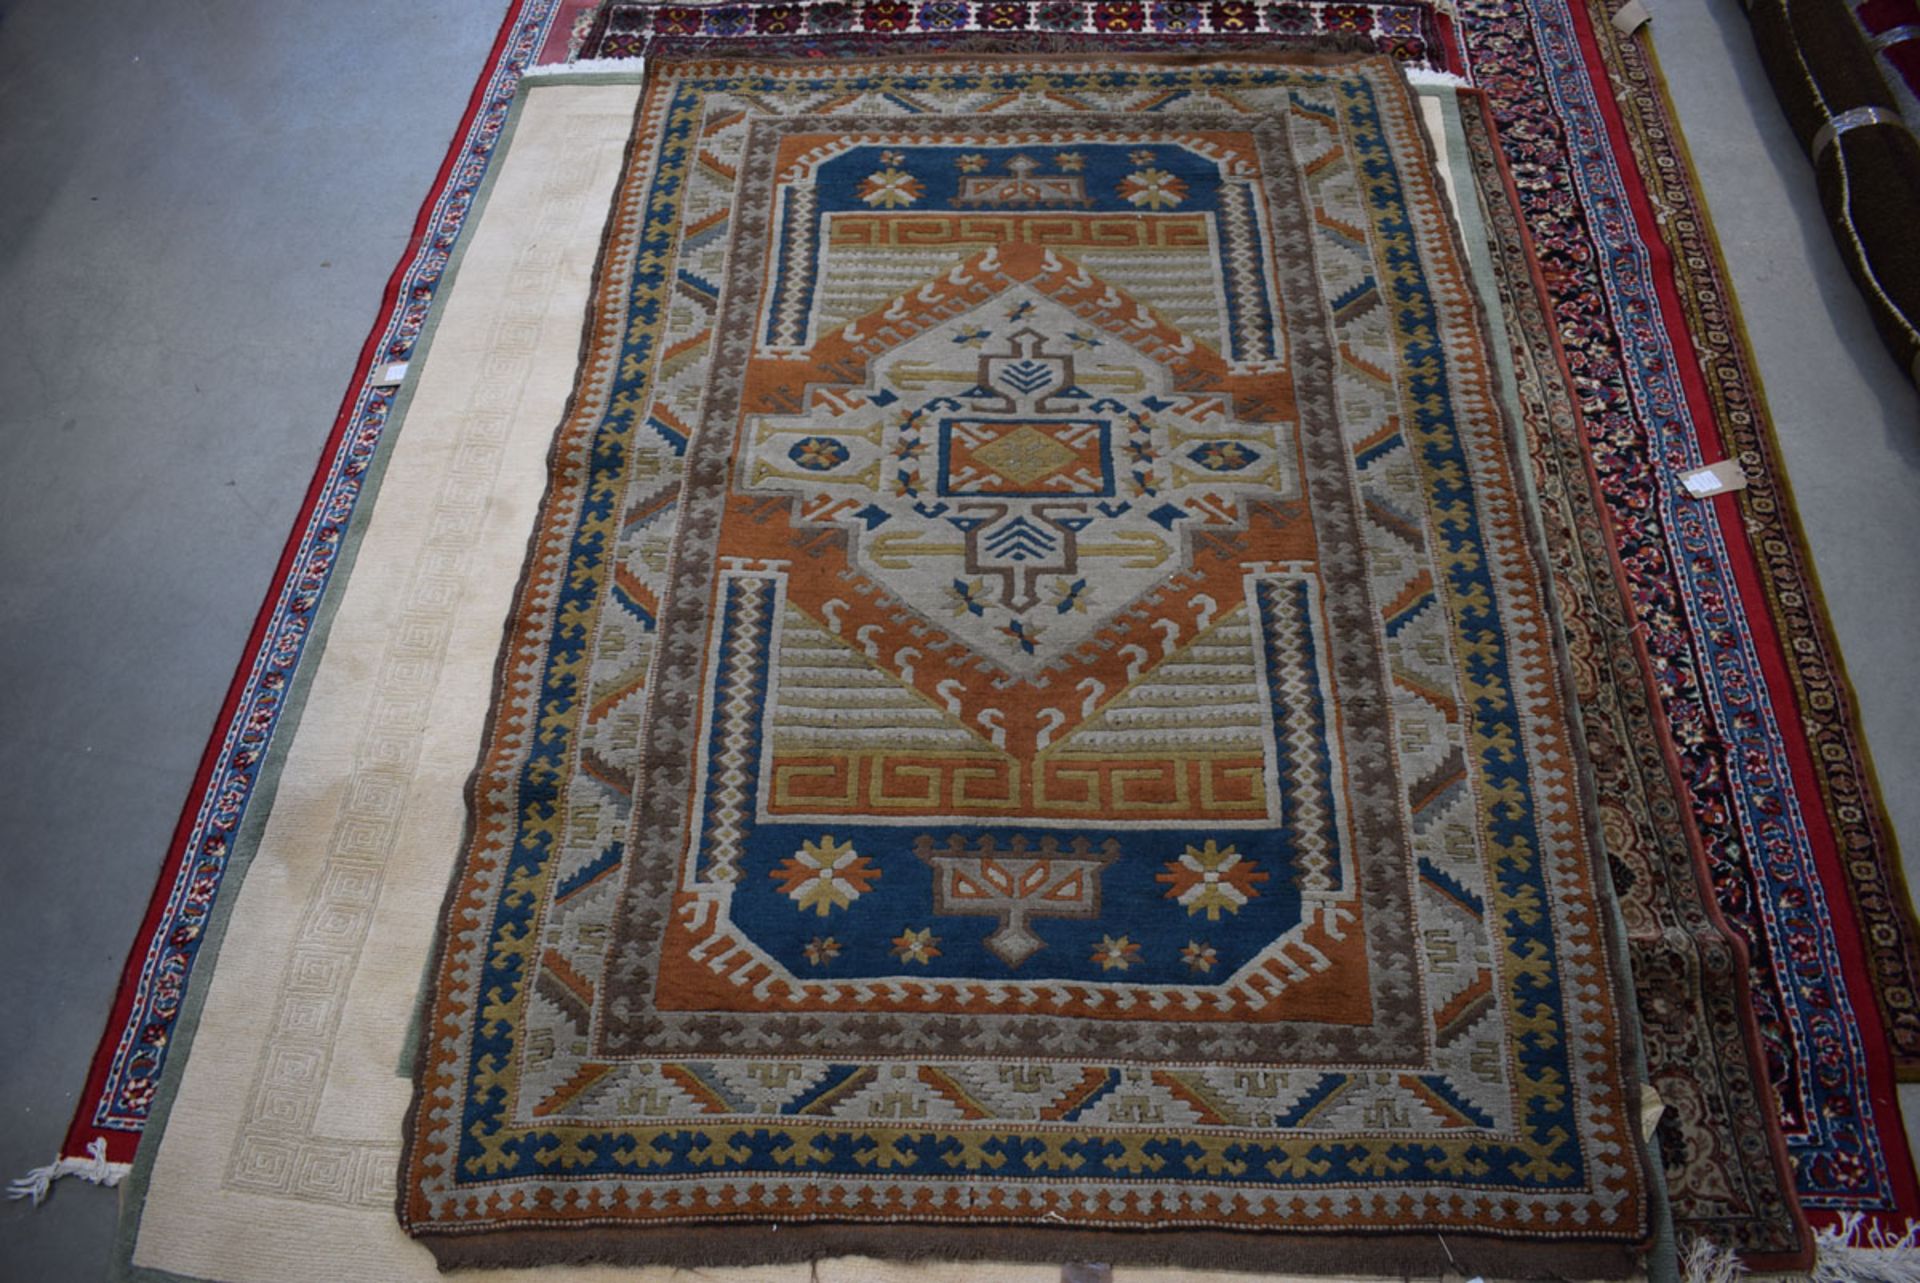 5152 (16) Afghan woolen carpet in shades of brown, cream, and blue approx. 1.6 x 2m